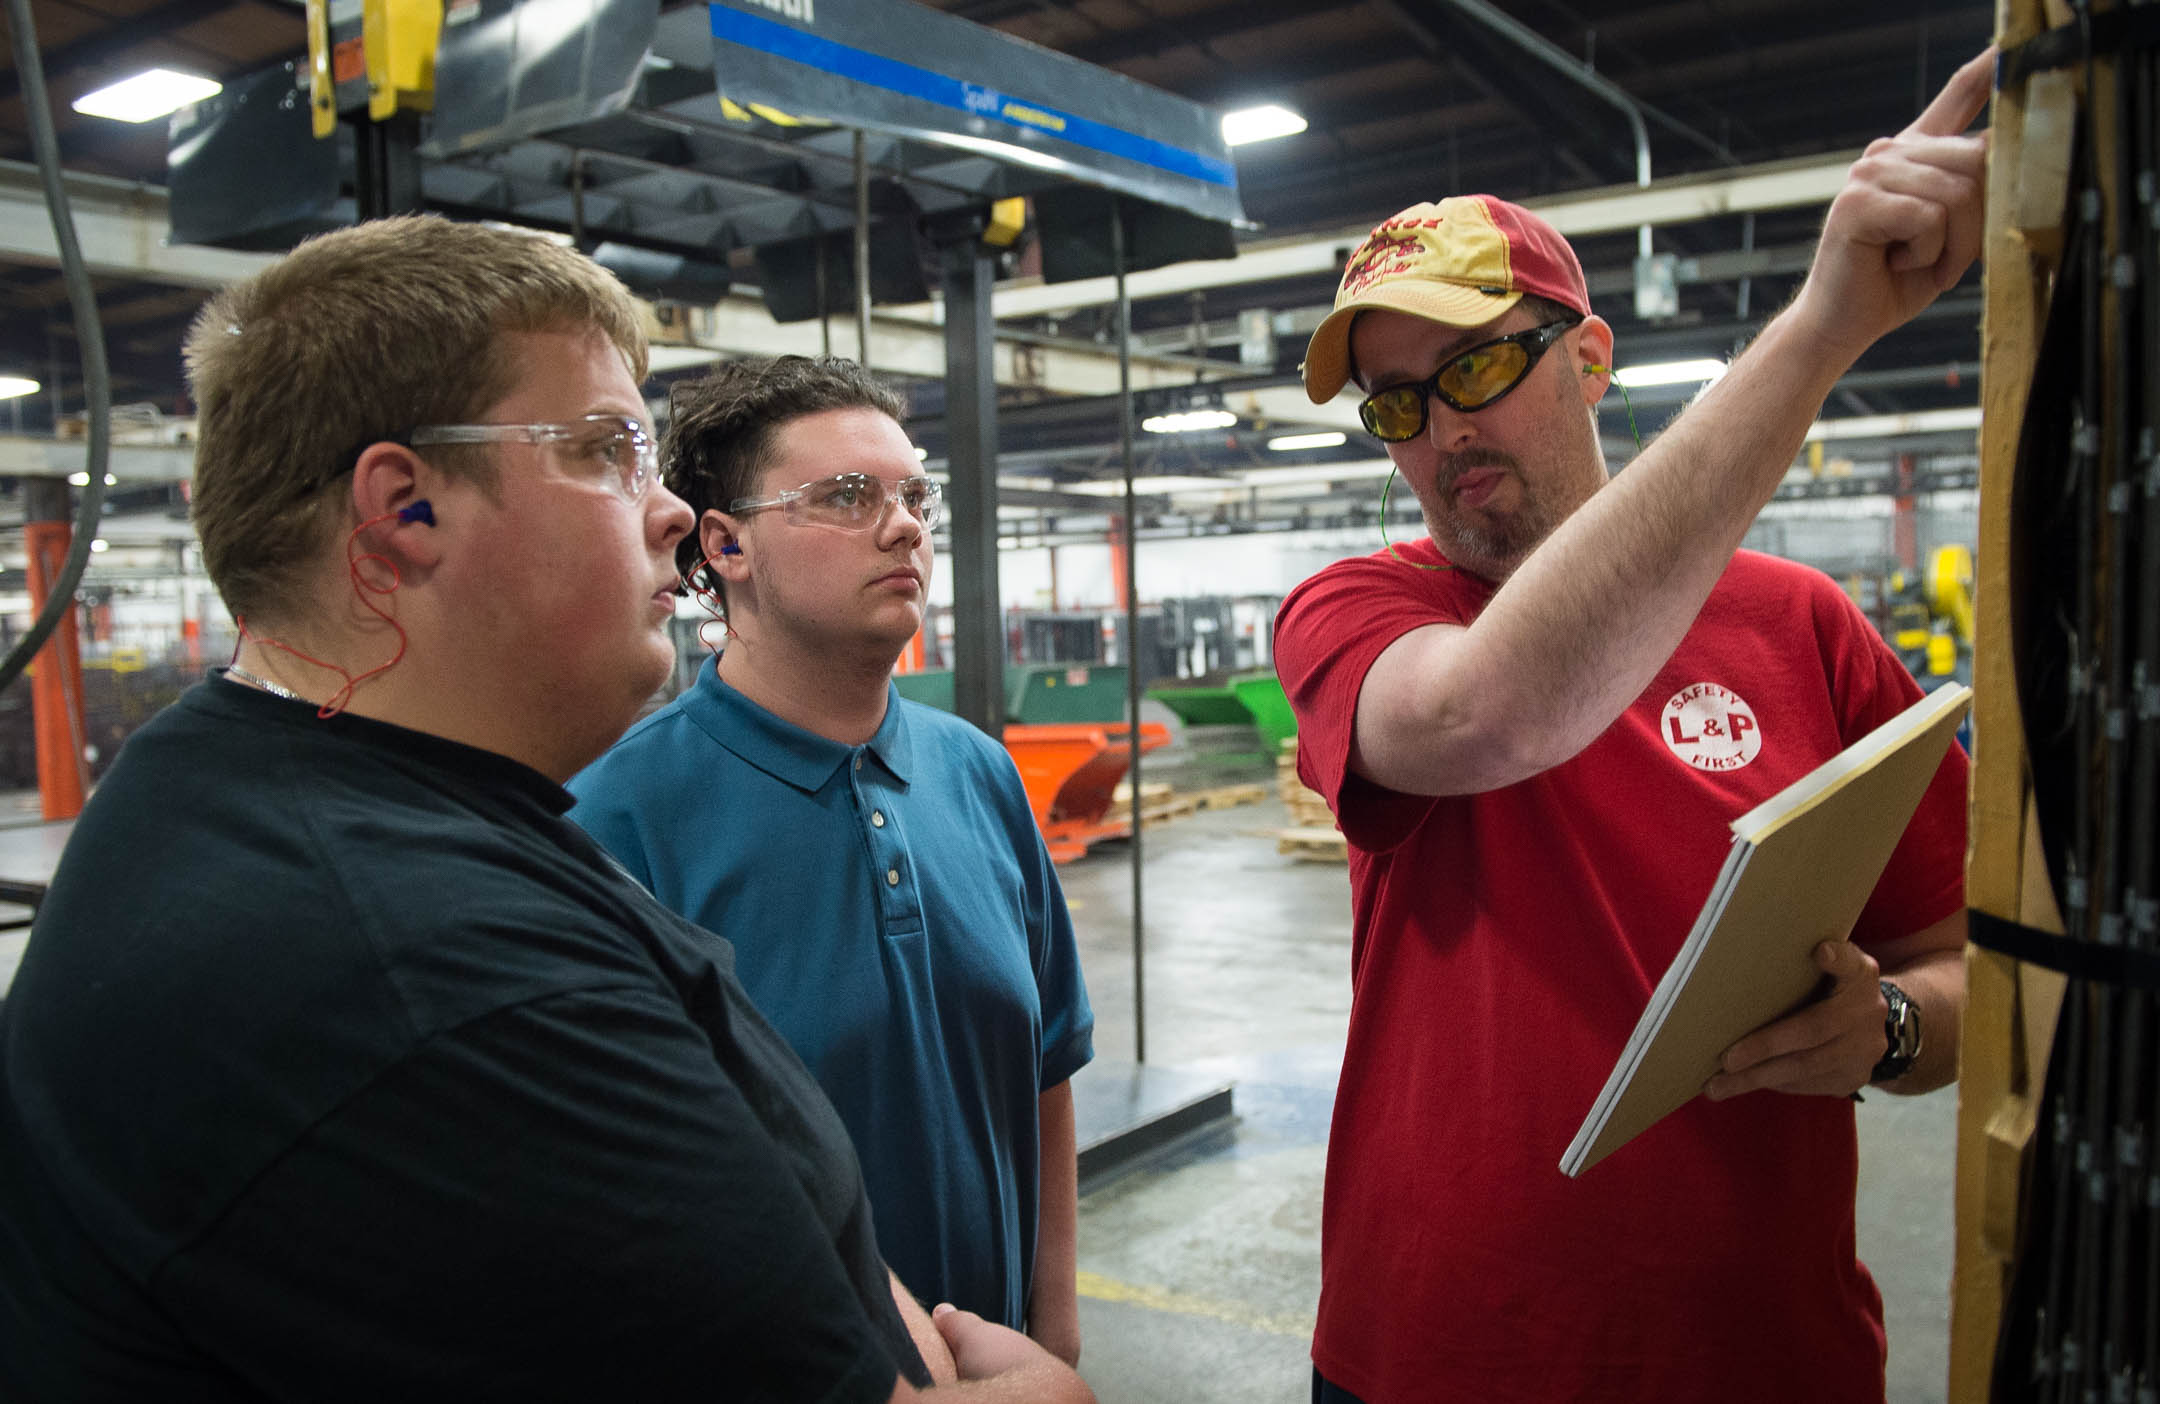 Jeff Fletcher, right, a quality technician at Leggett & Platt’s Winchester manufacturing facility, shows Clark County Area Technology Center students Brett Foley and Garrett Samuels what to look for while doing a quality inspection. Photo by Bobby Ellis, Oct. 25, 2016